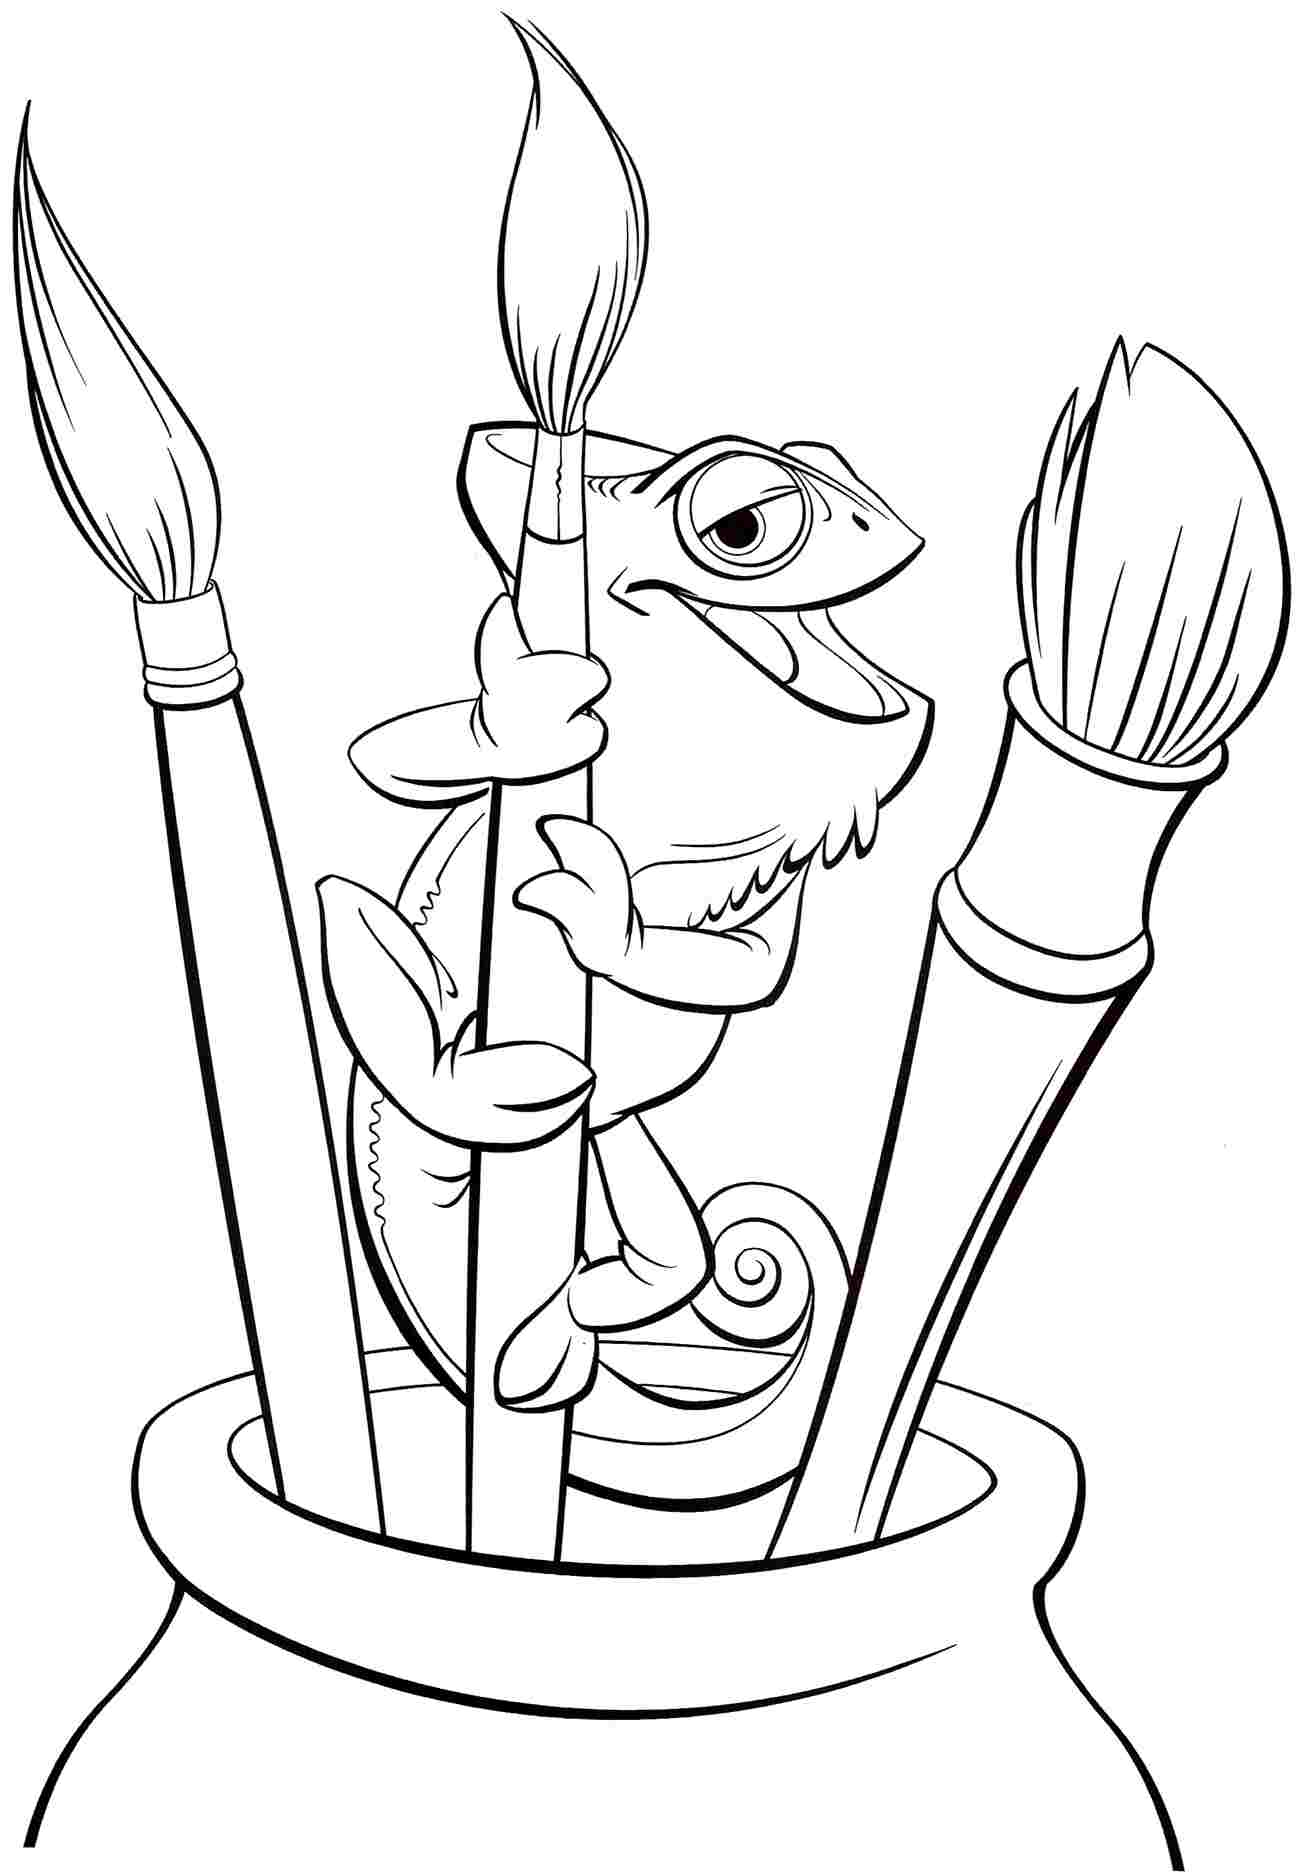 Pascal-Coloring-Pages.jpg